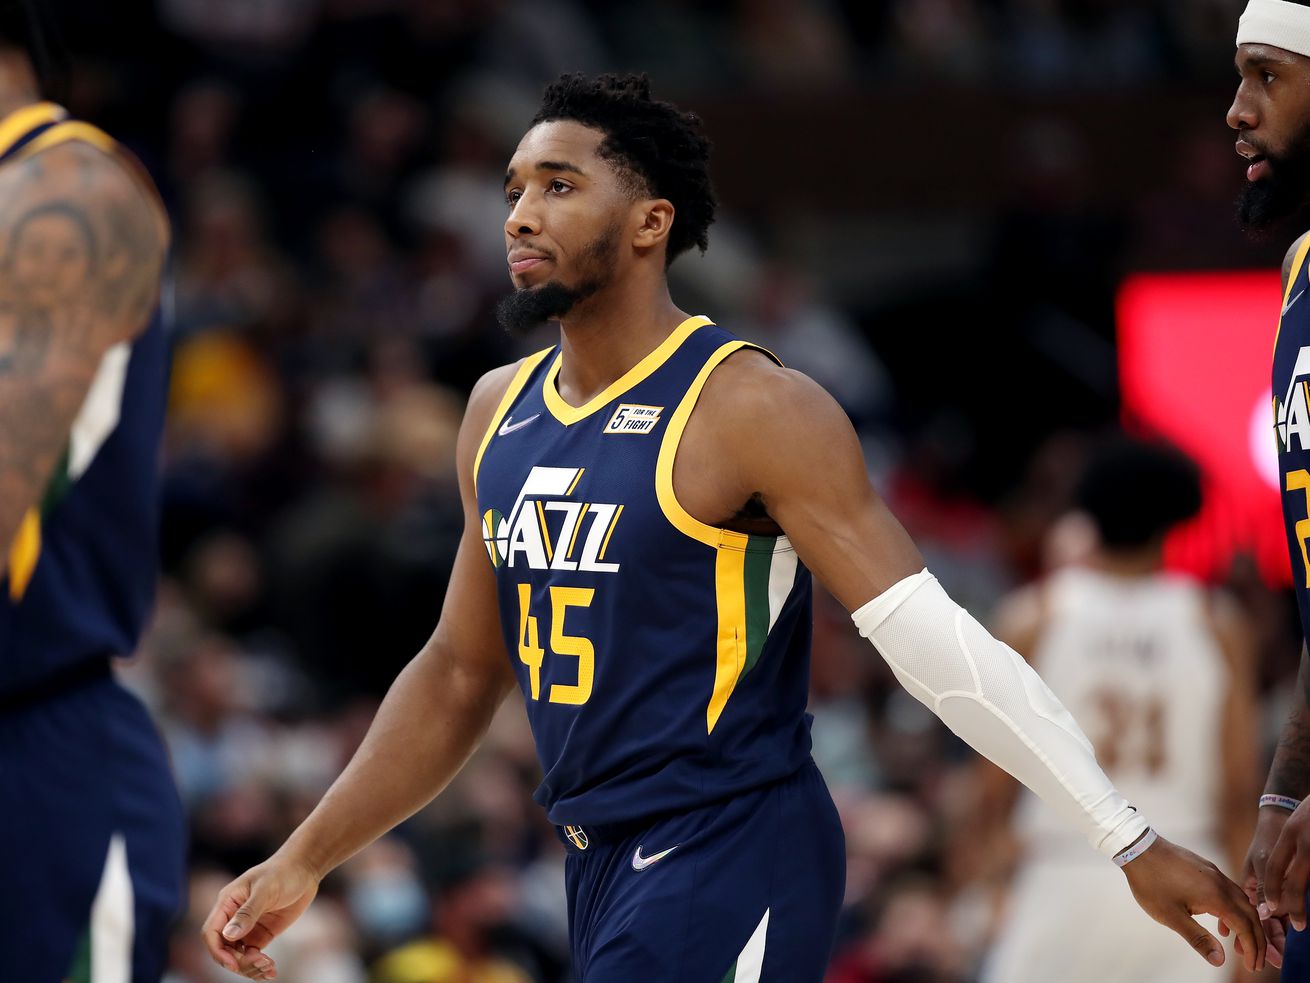 Utah Jazz guard Donovan Mitchell (45) shows frustration as he walks to the bench after losing the ball and committing a foul as the Utah Jazz and the Cleveland Cavaliers play an NBA basketball game at Vivint Arena in Salt Lake City on Wednesday, Jan. 12, 2022. Cavs won 111-91.